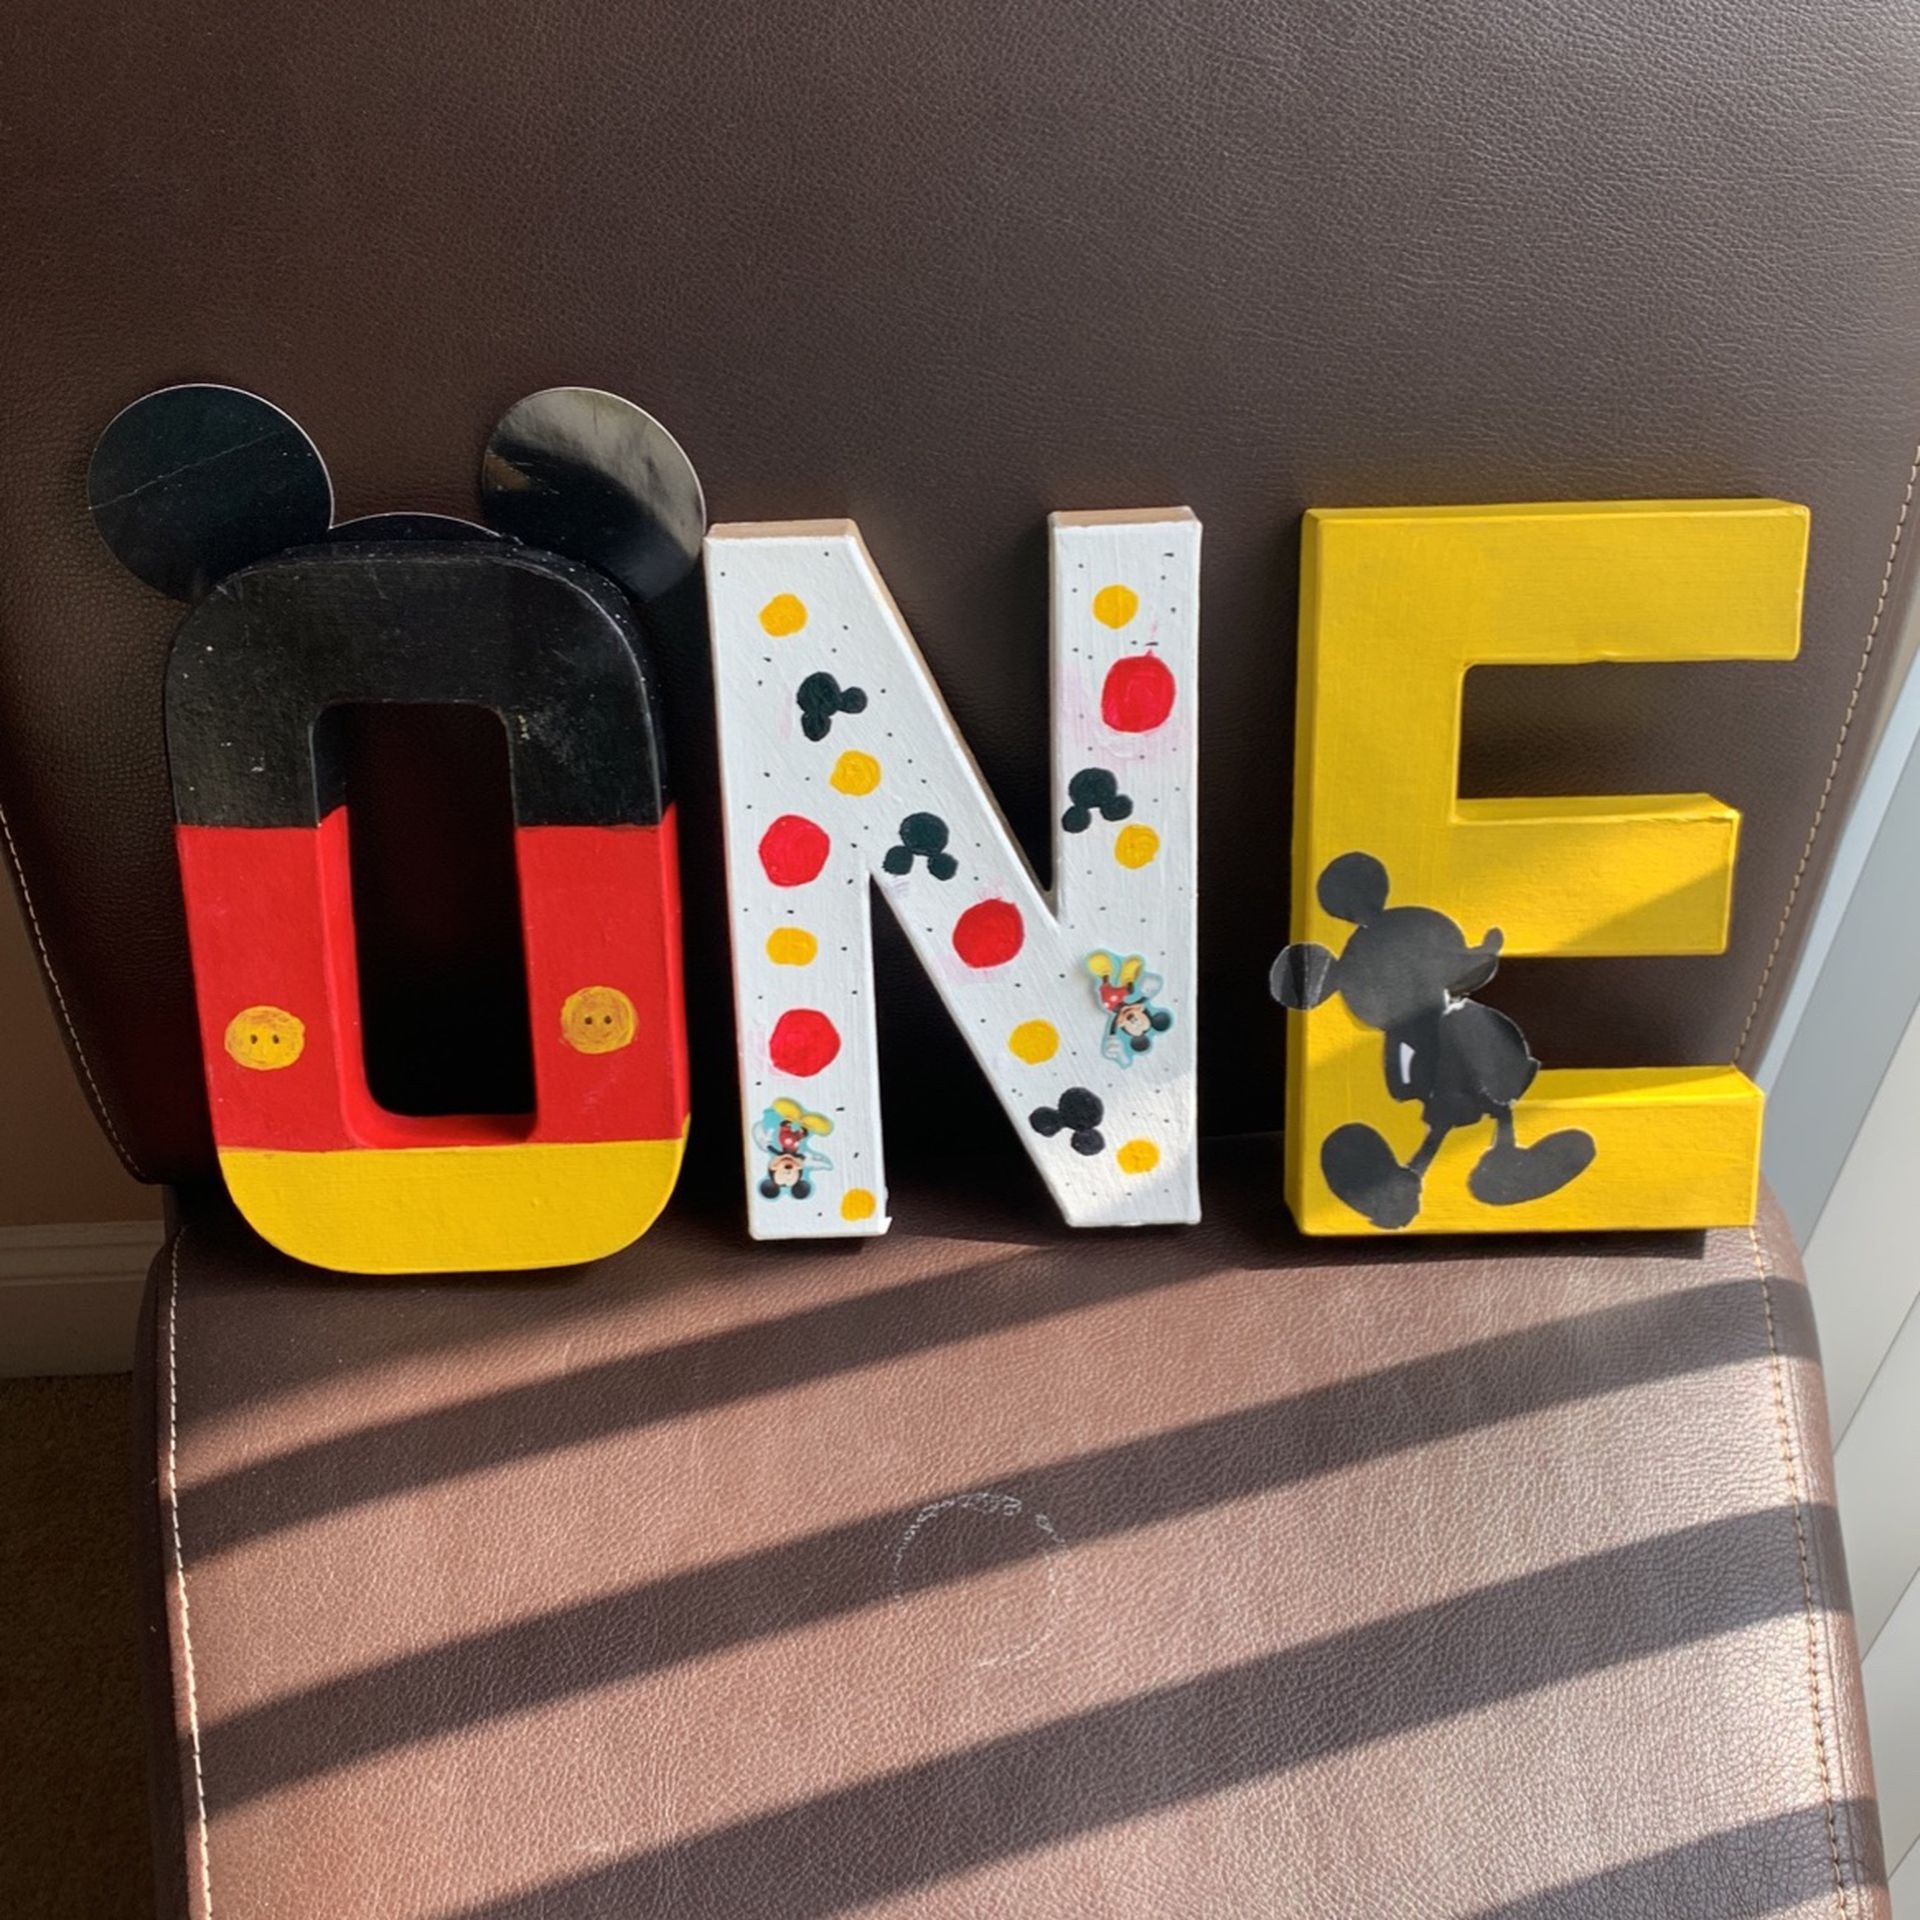 Mickey Mouse Party Decor